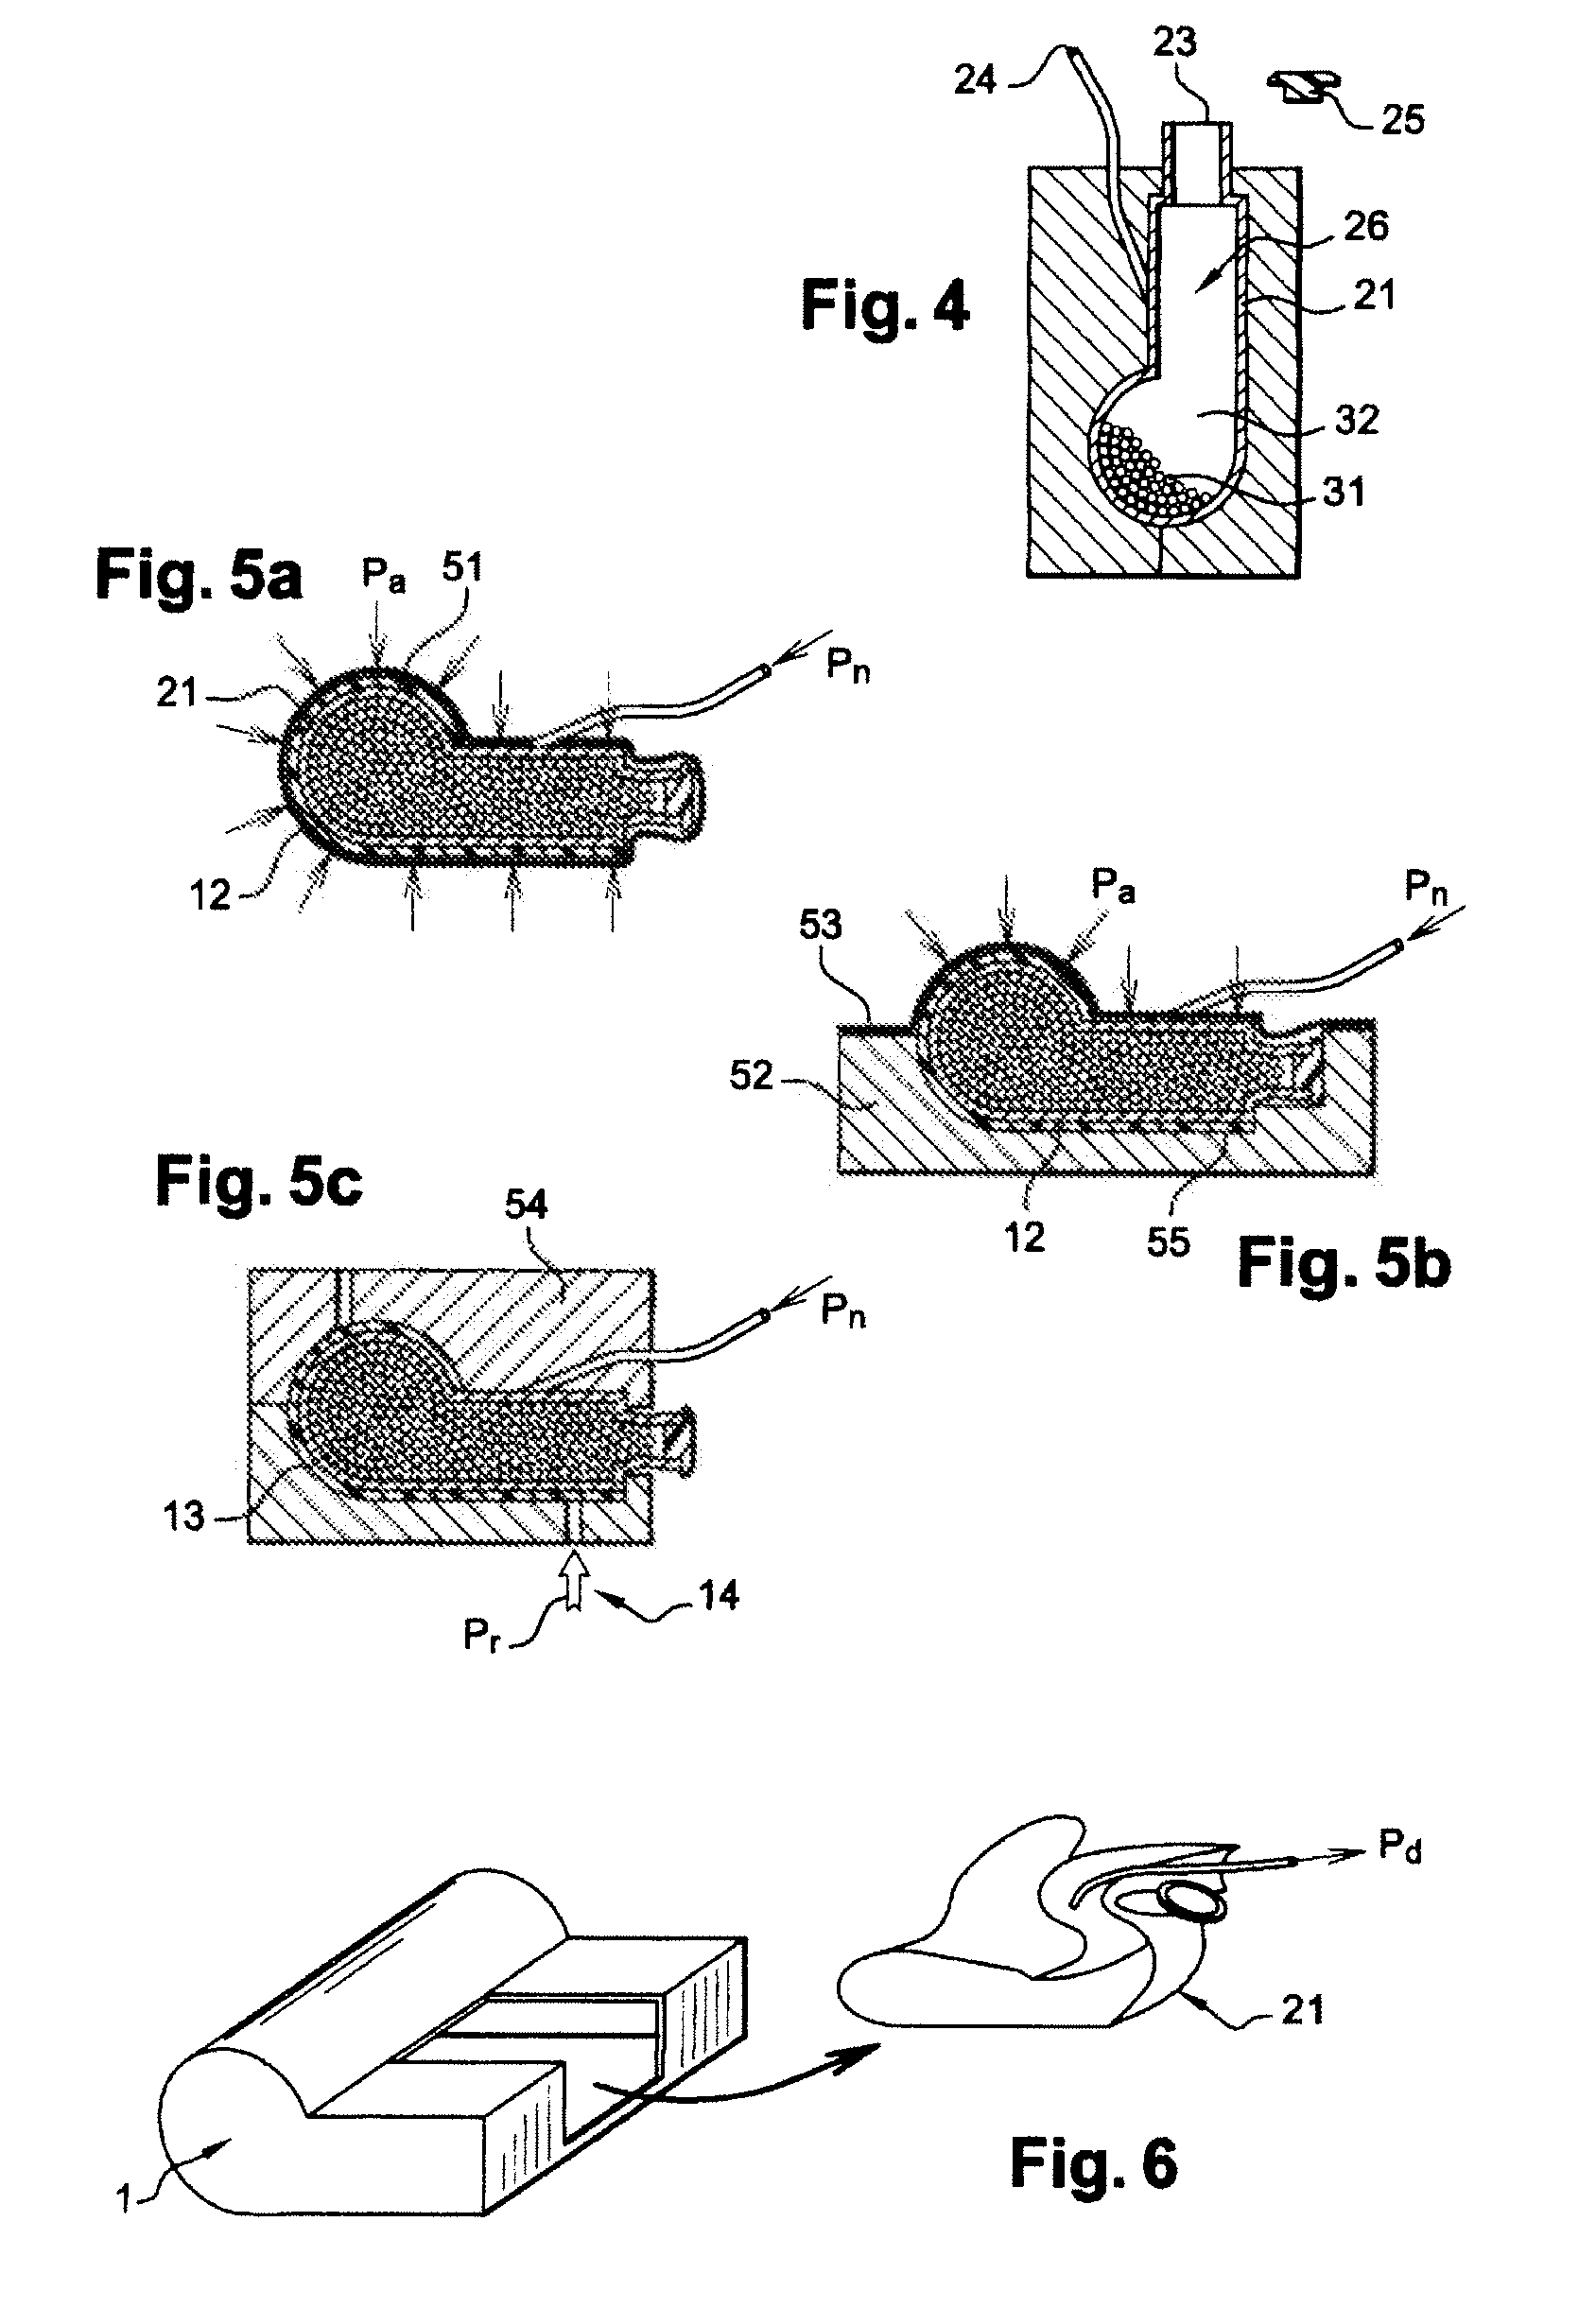 Method for producing structures of complex shapes of composite materials